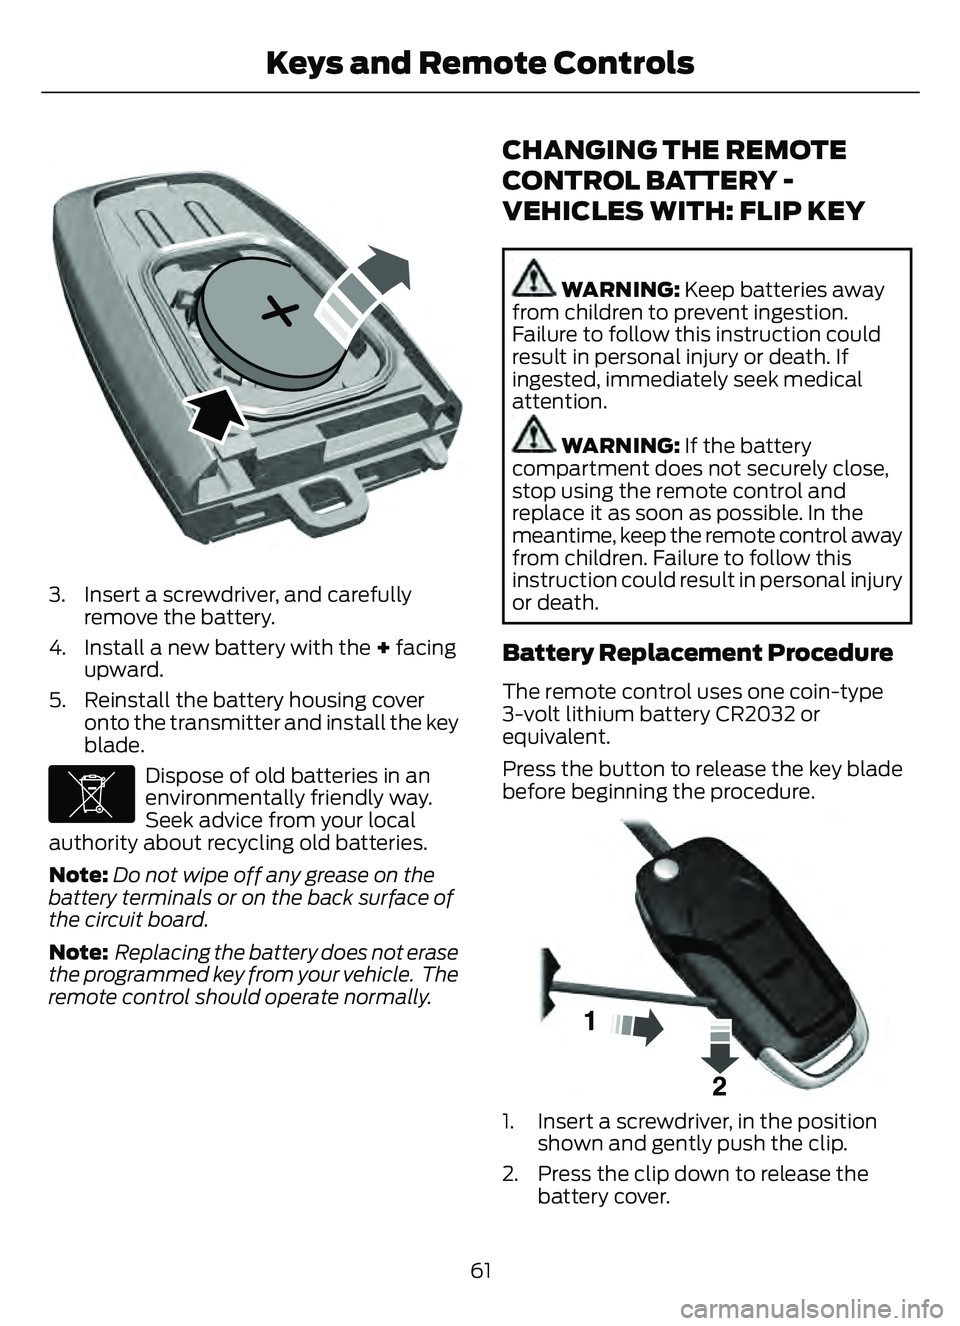 FORD ESCAPE 2022  Owners Manual E218402
3. Insert a screwdriver, and carefullyremove the battery.
4. Install a new battery with the + facing upward.
5. Reinstall the battery housing cover onto the transmitter and install the key
bla